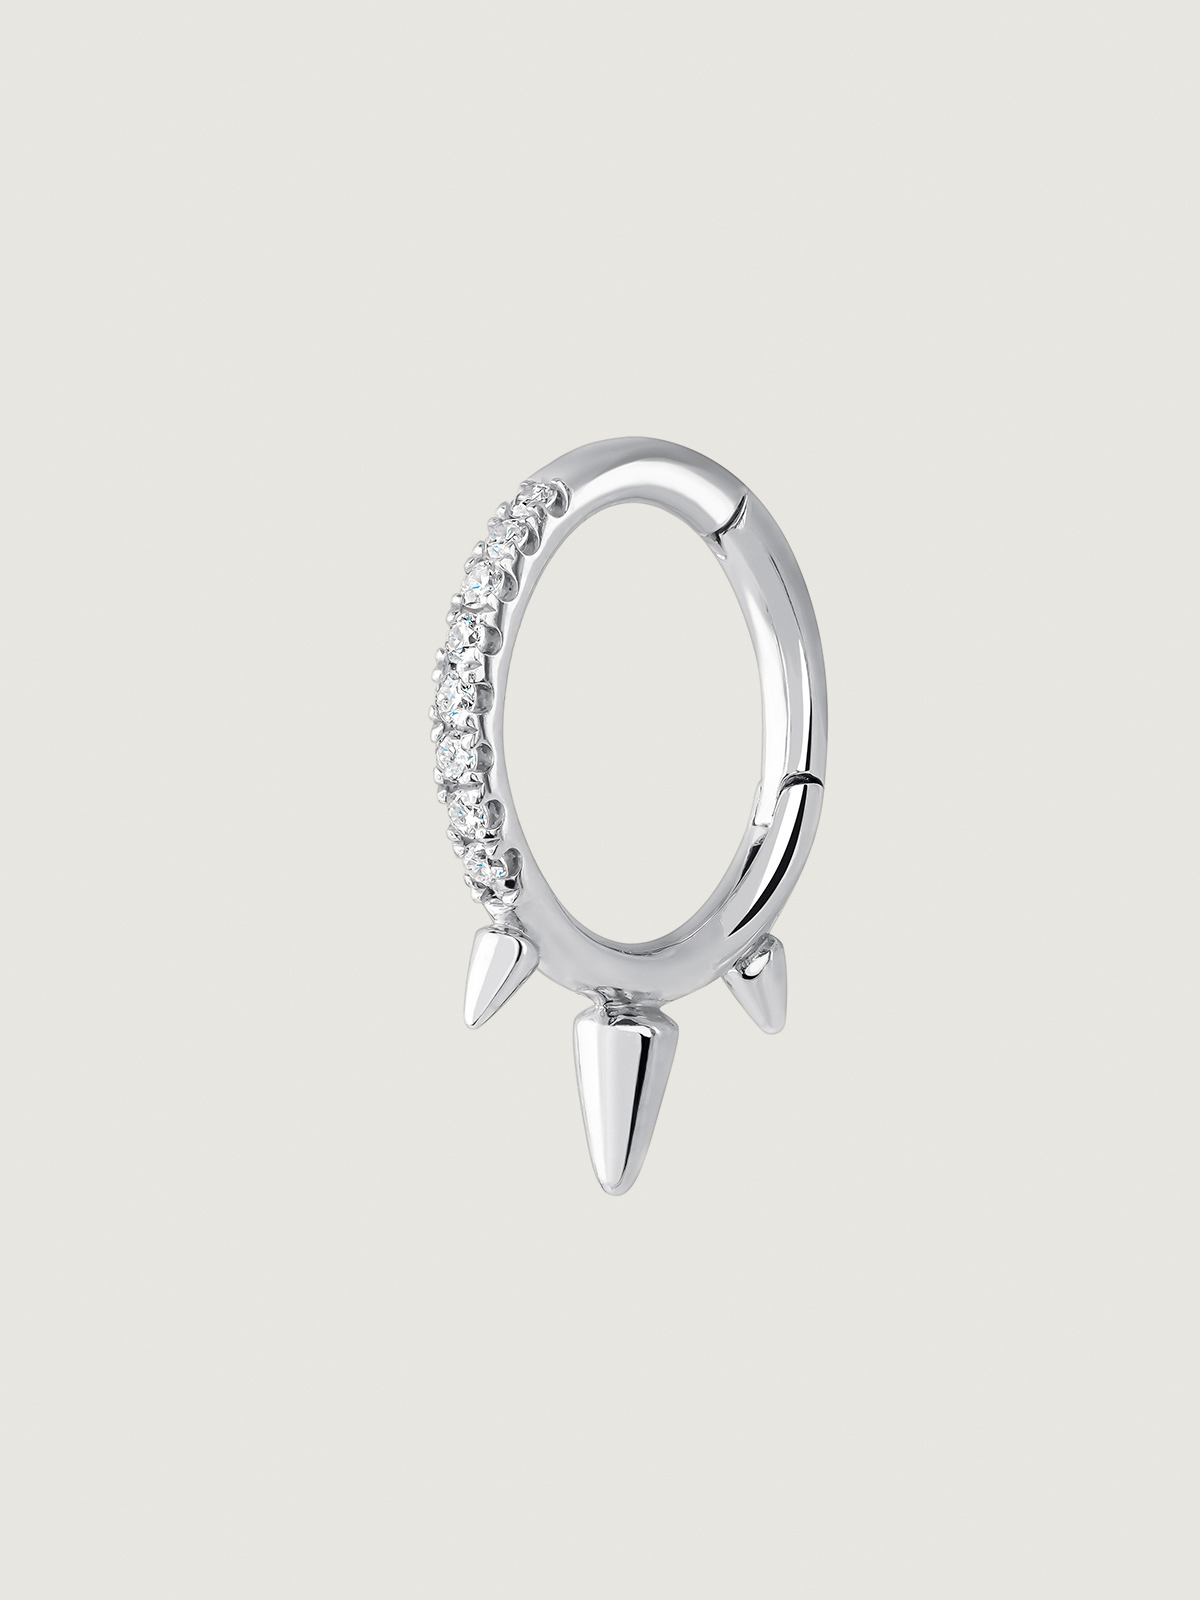 Individual small hoop earring in 9K white gold with spikes and diamonds.